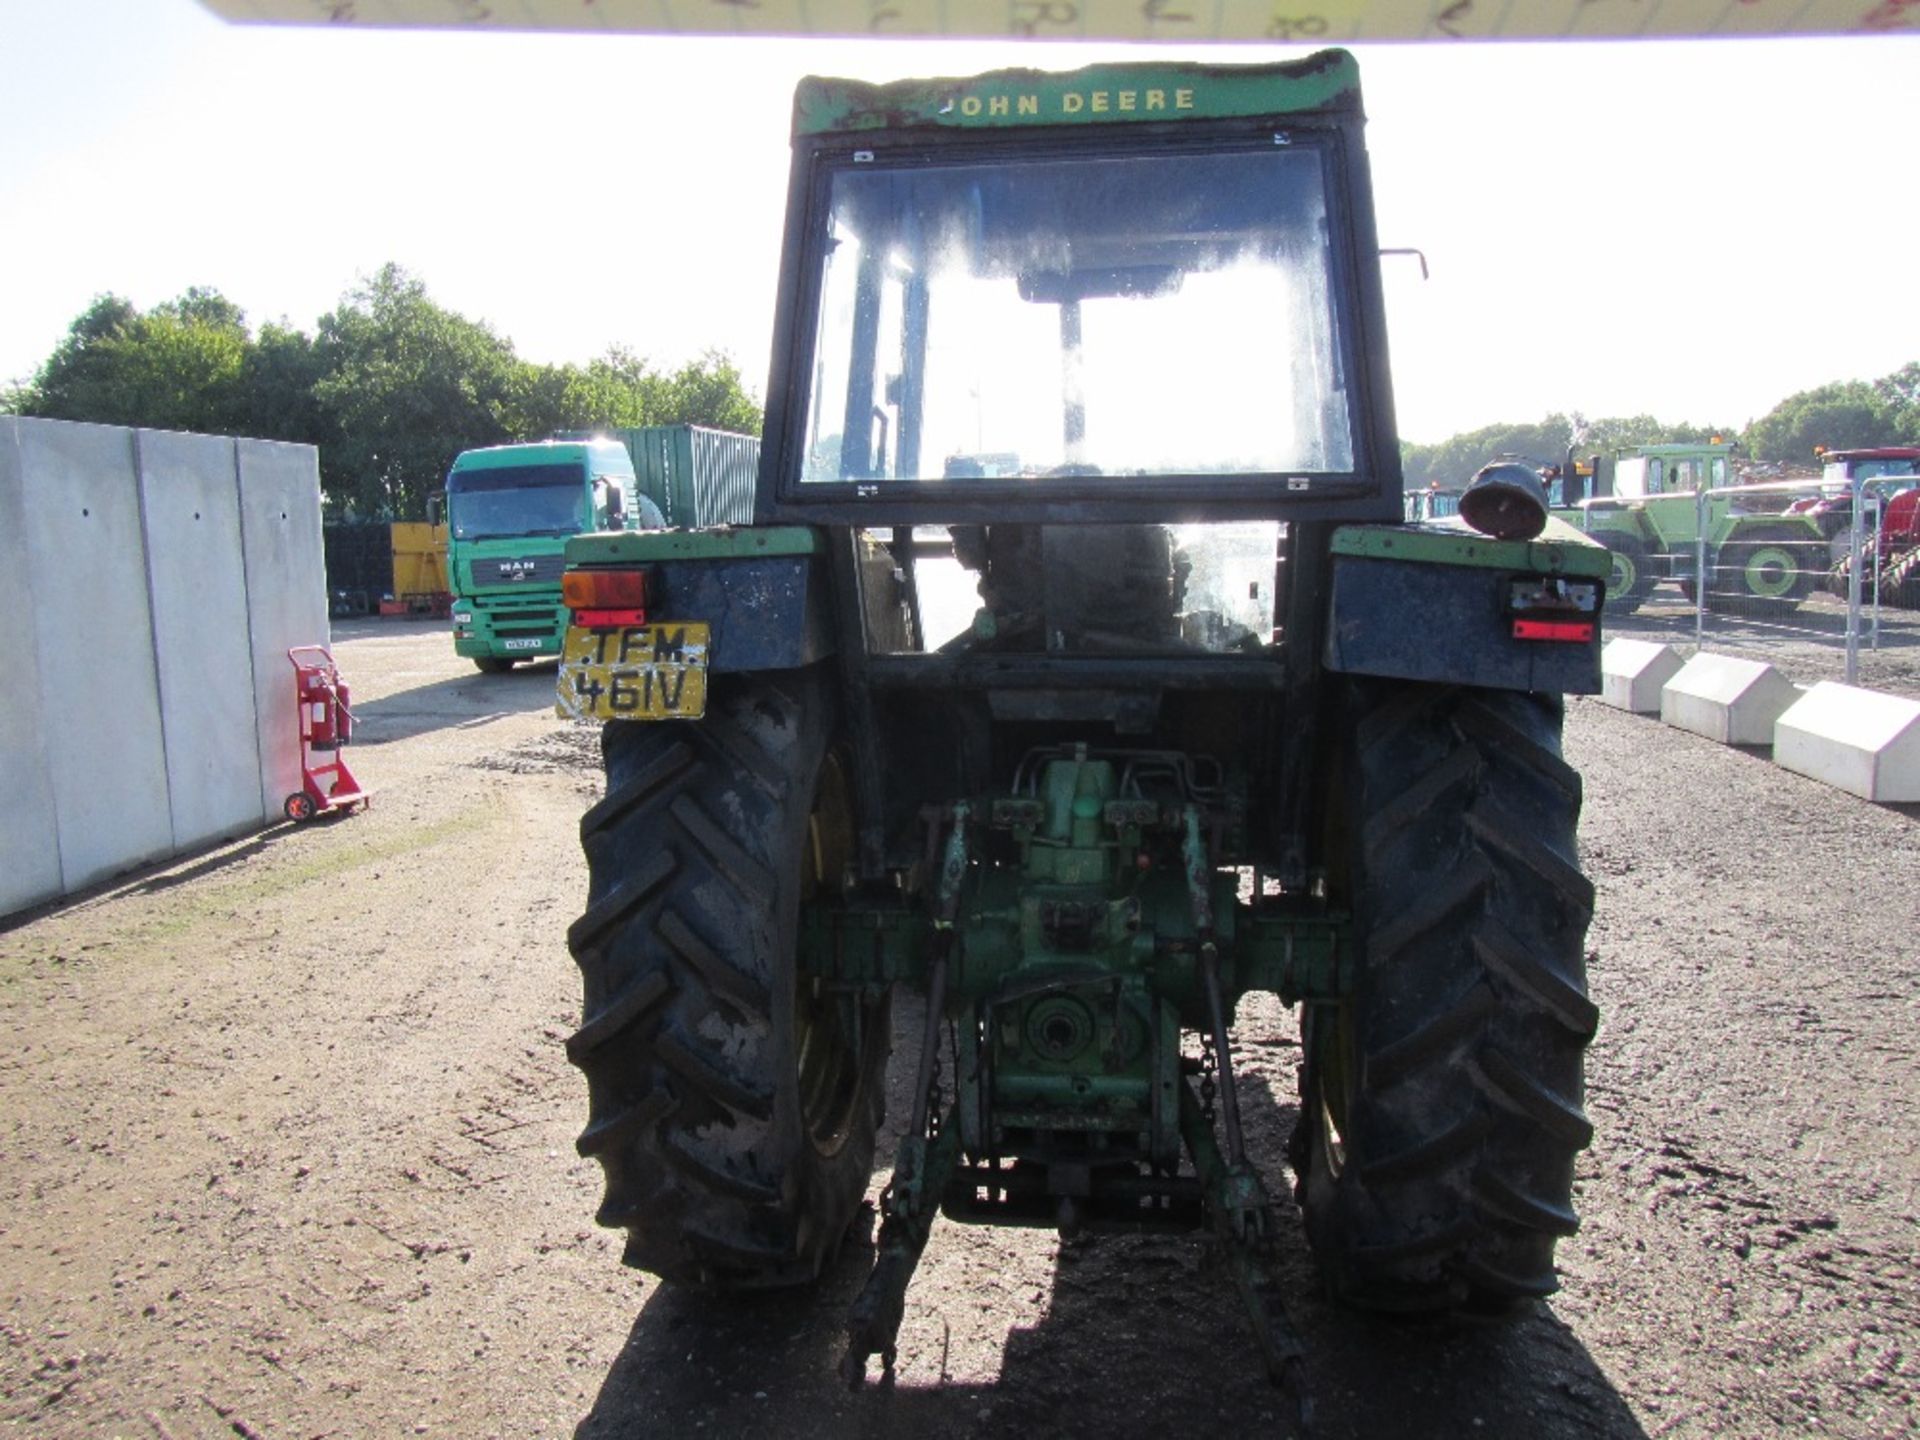 John Deere 3040 2wd Tractor with OPU Cab Reg. No. TFM 461V Ser No 364600 UNRESERVED LOT - Image 6 of 16